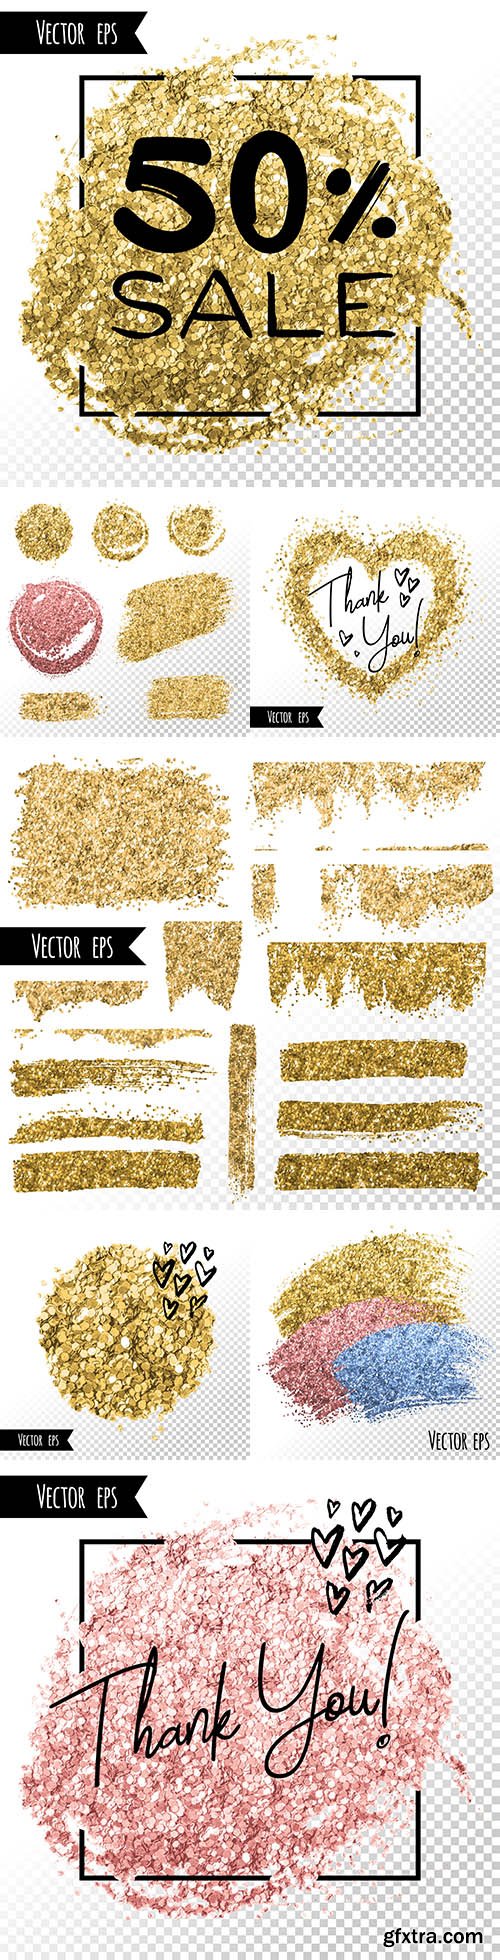 Gold foil gloss brush stroke and background template